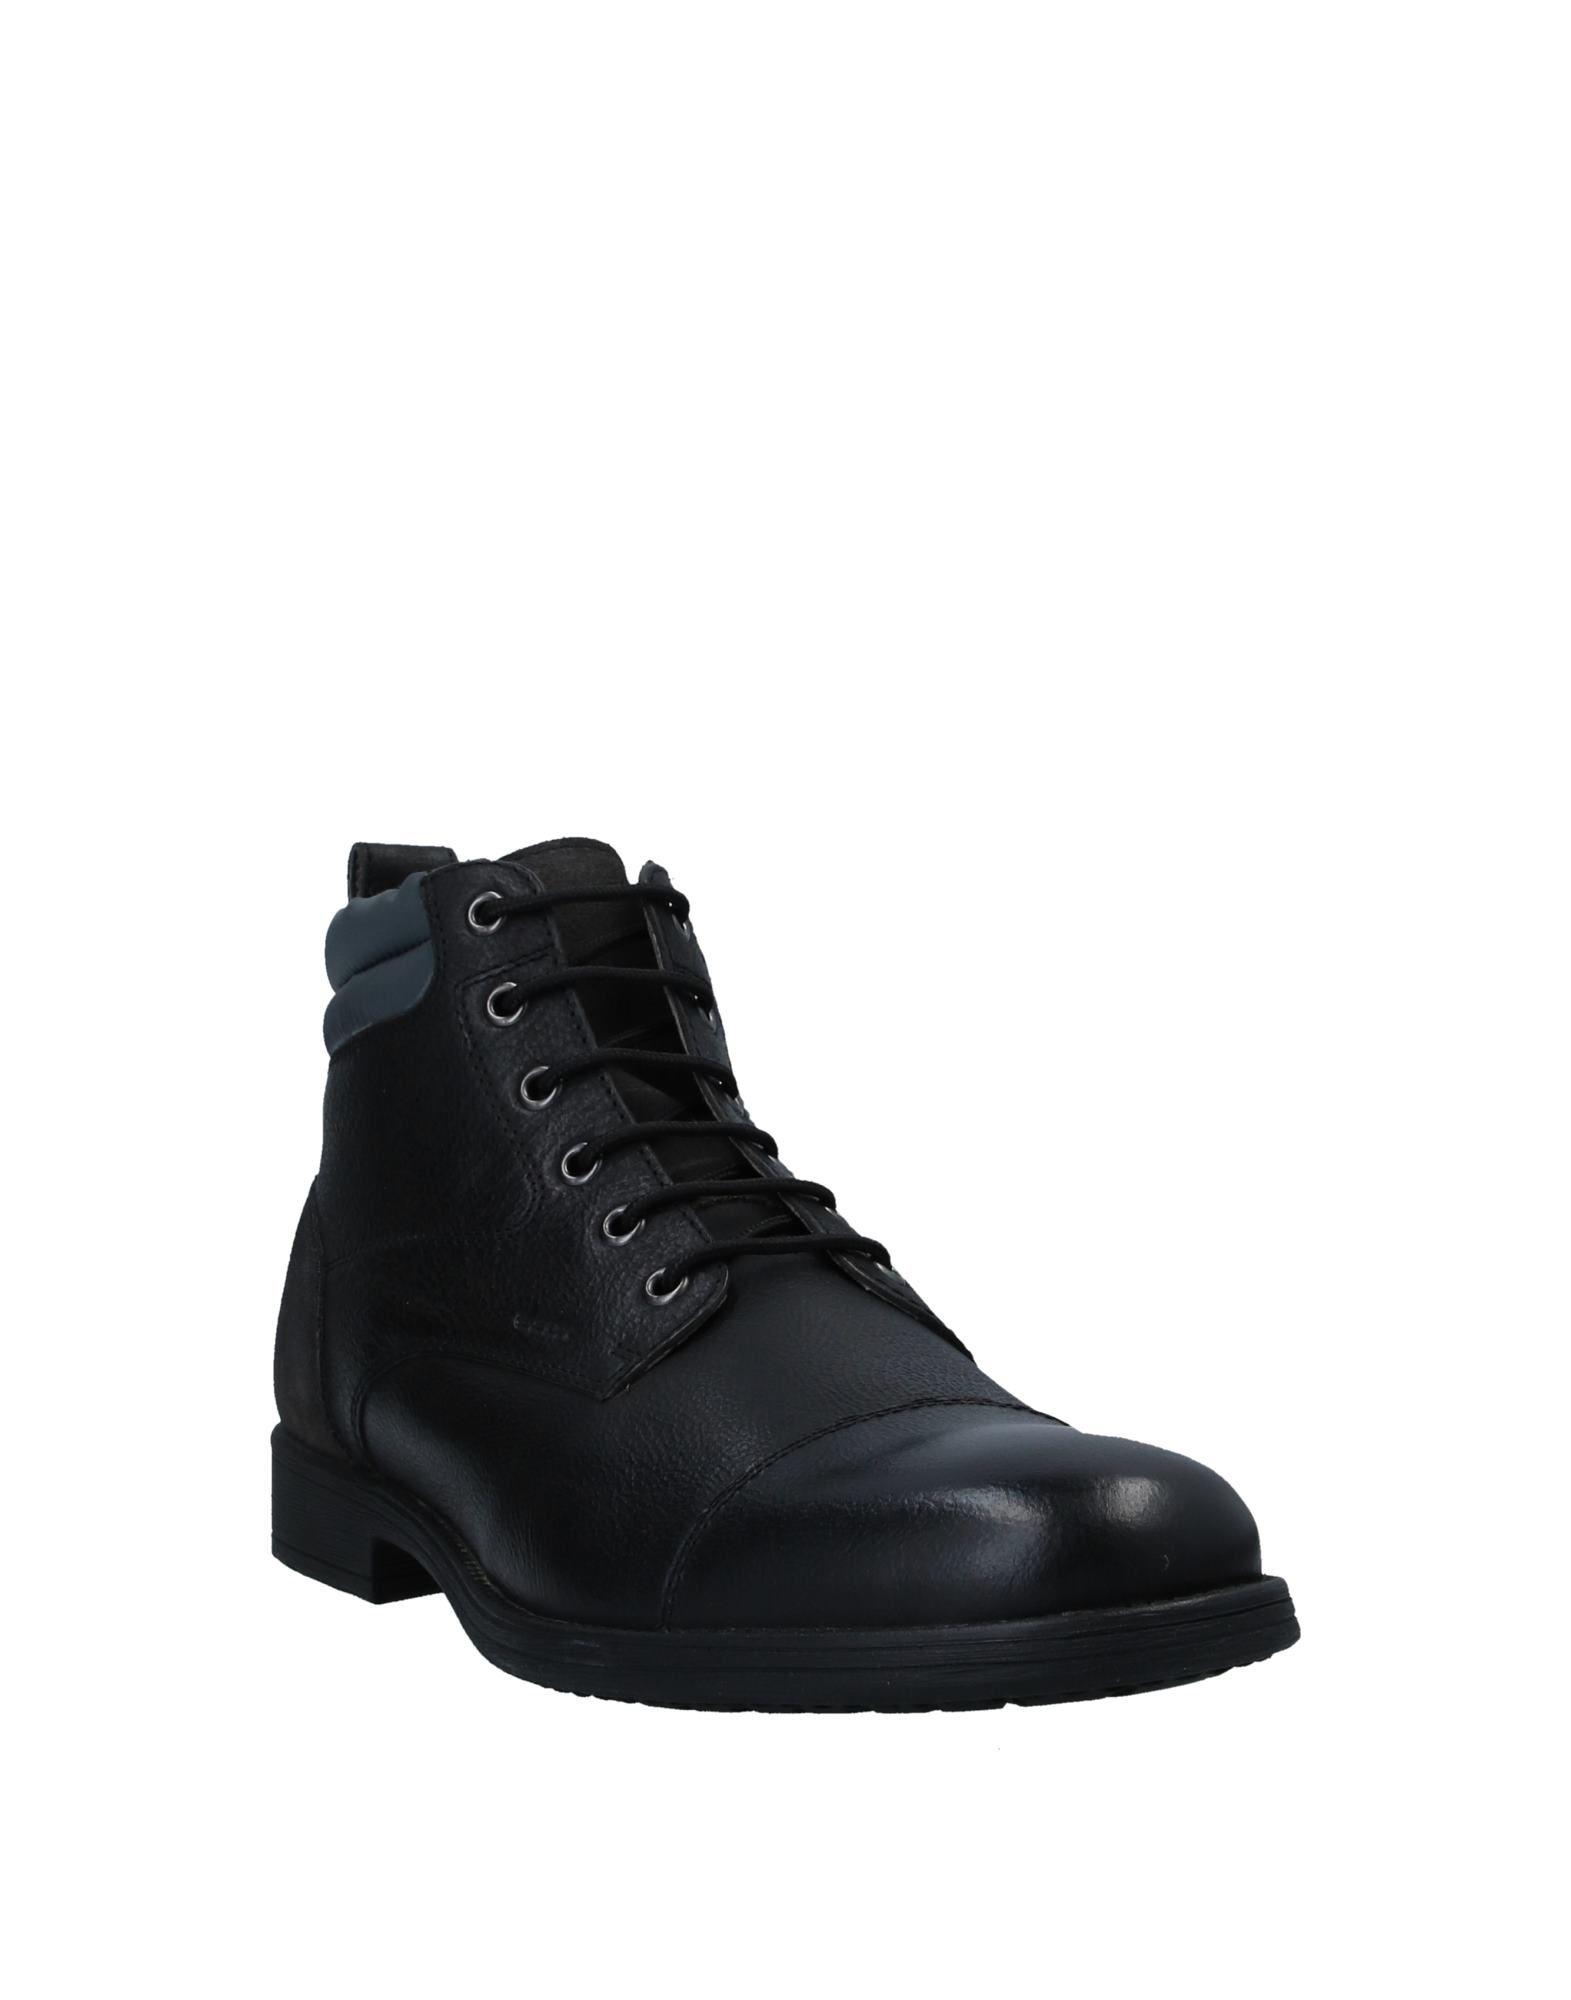 Geox Ankle Boots in Black for Men - Lyst